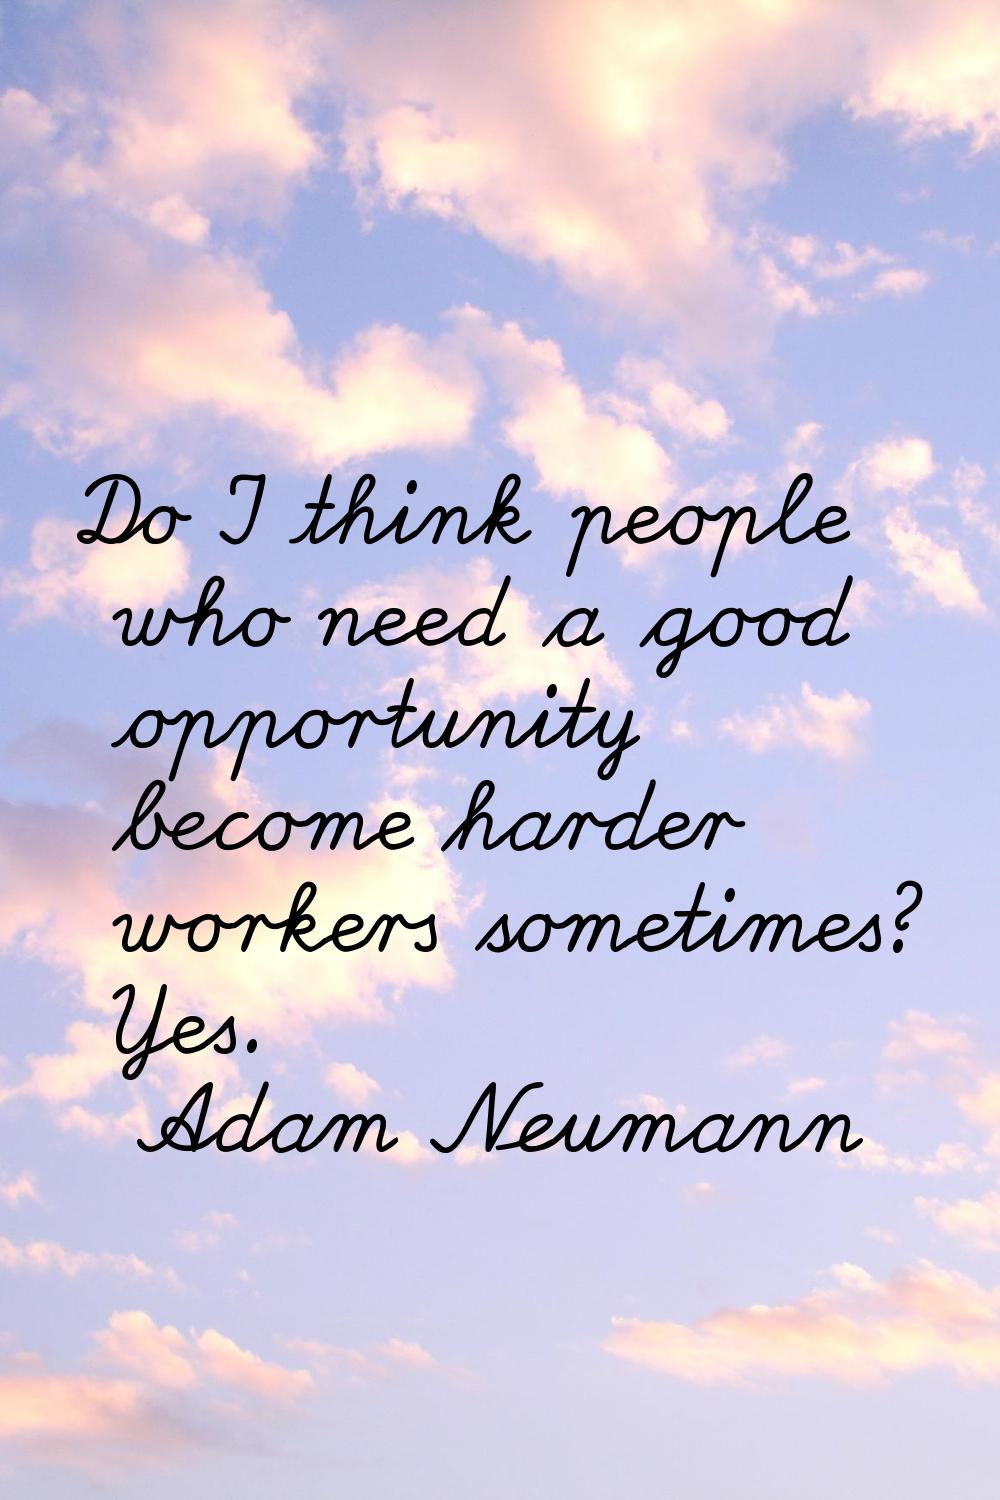 Do I think people who need a good opportunity become harder workers sometimes? Yes.